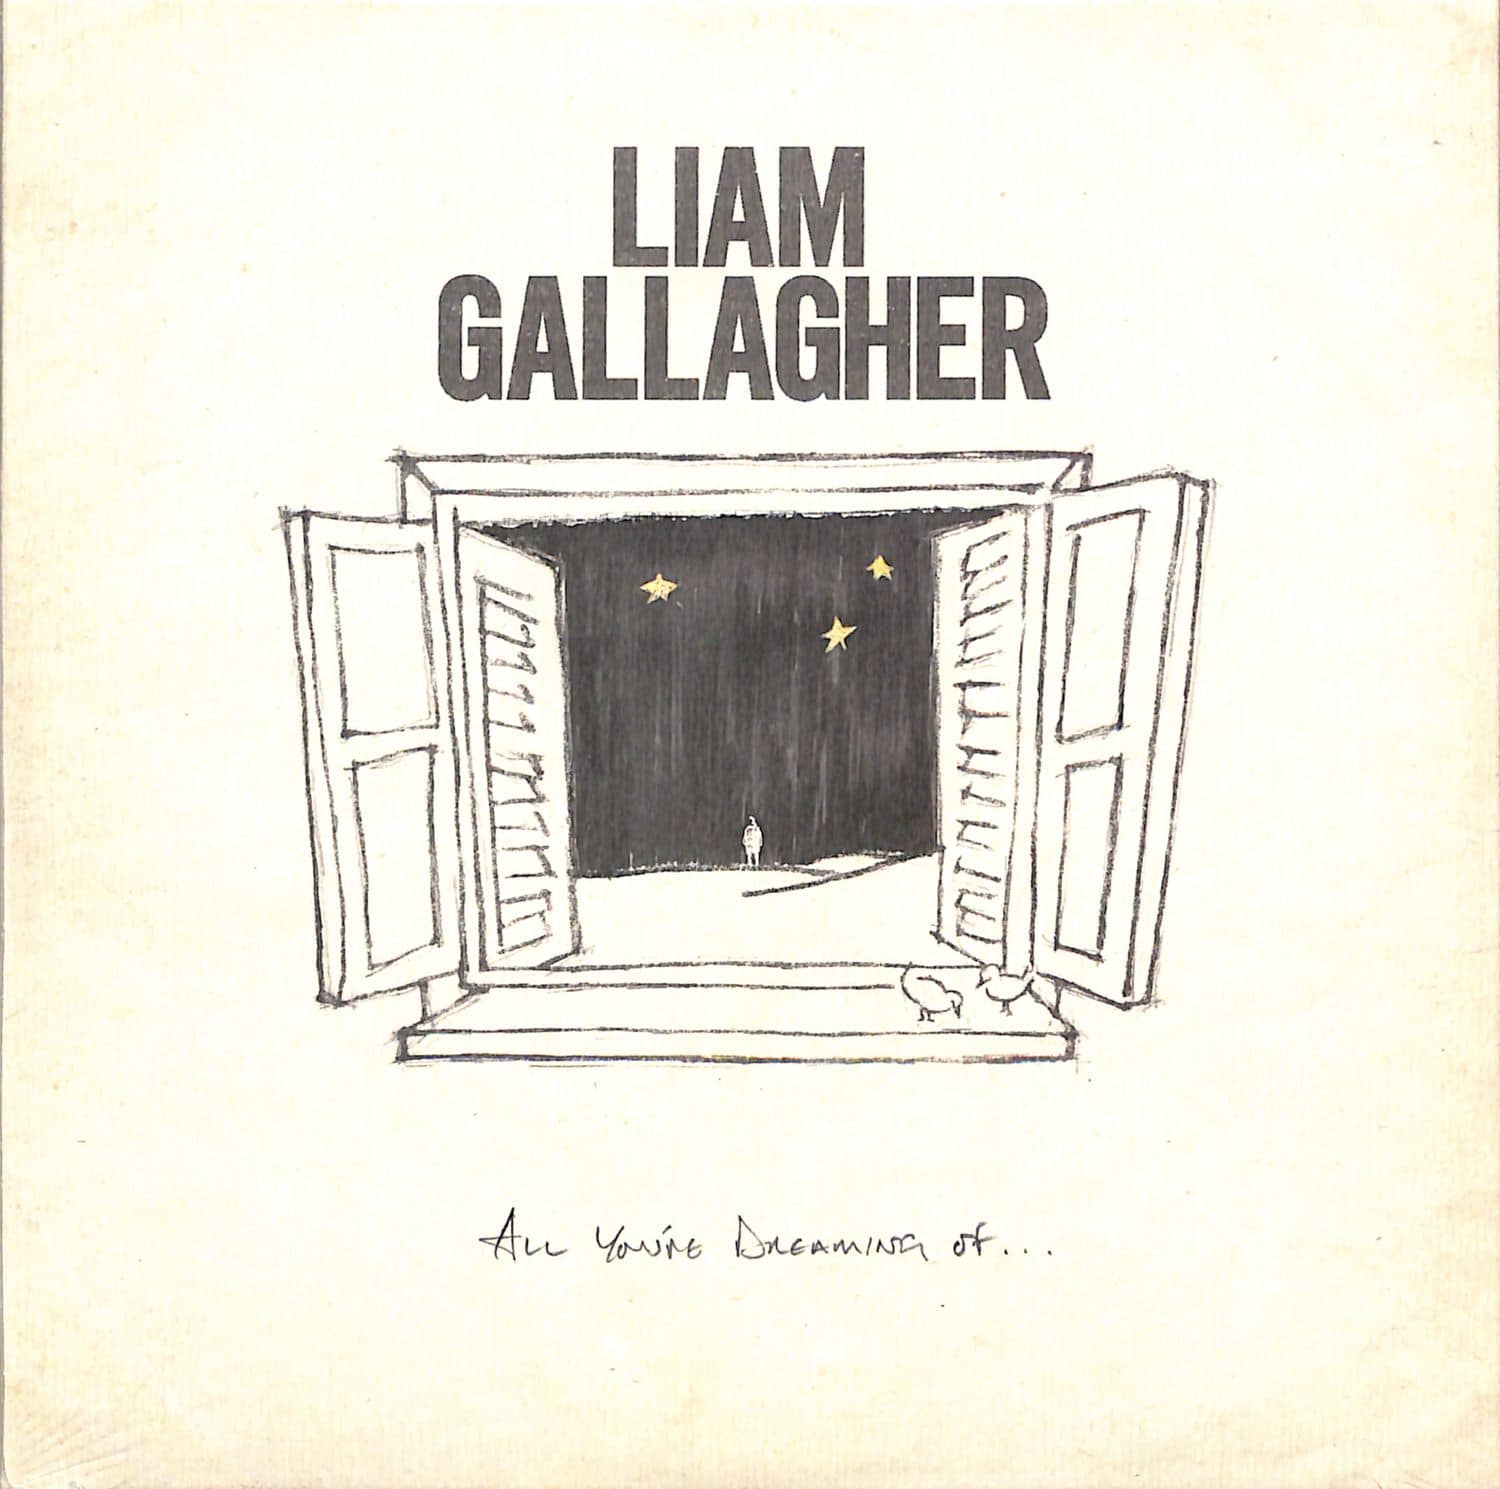 Liam Gallagher - ALL YOURE DREAMING OF 